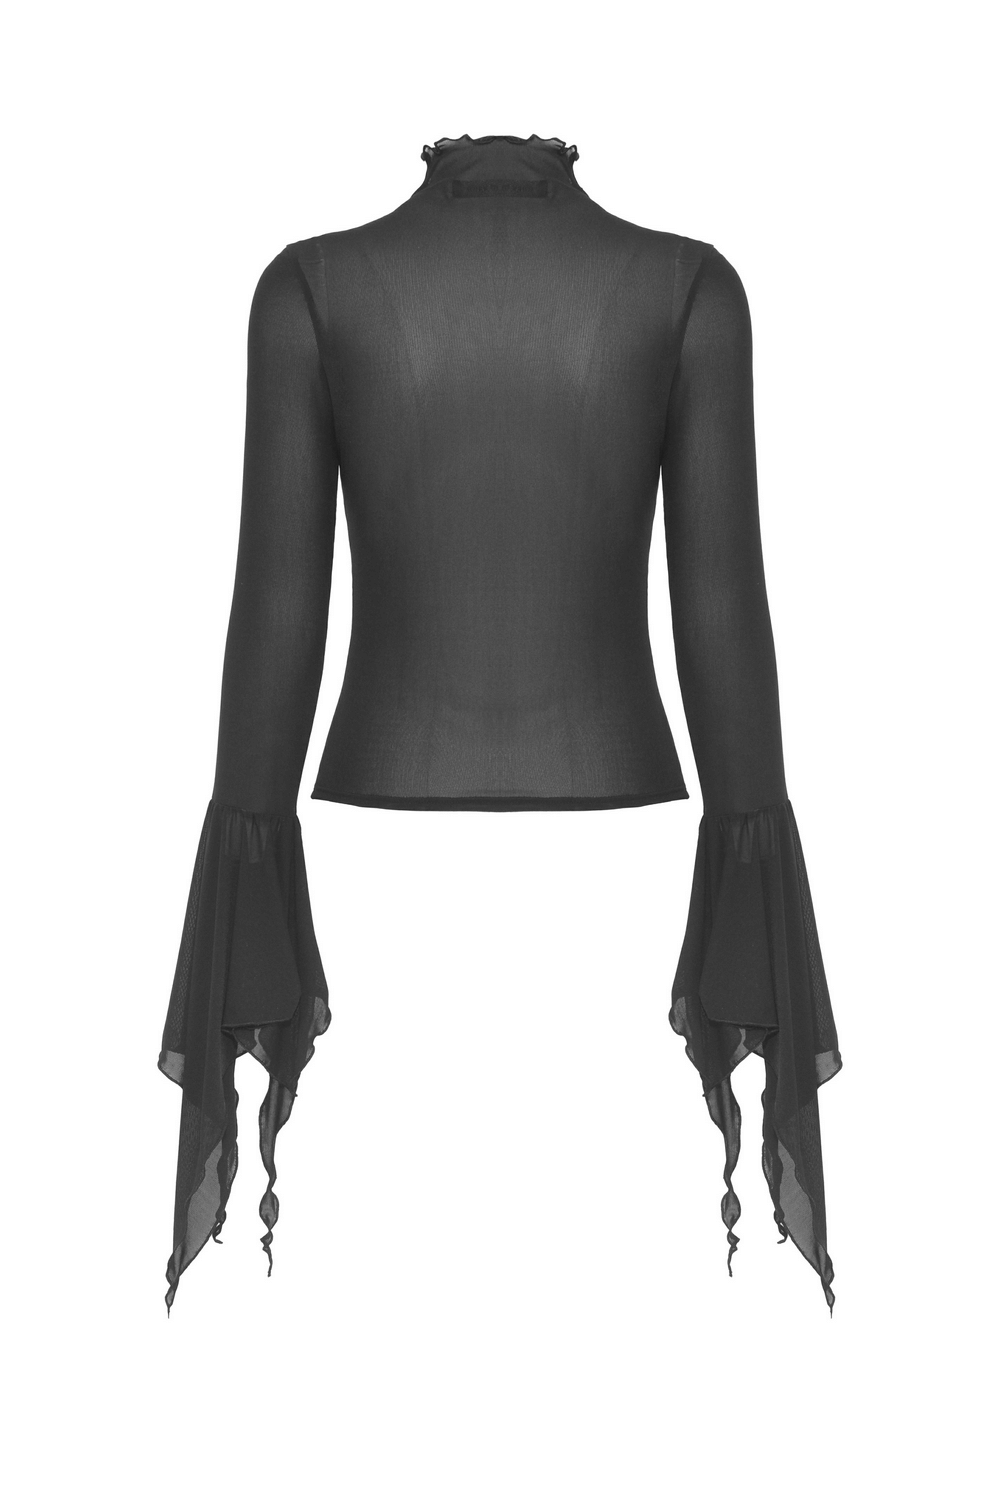 Women's Draped One-Shoulder Top with Long Sleeves